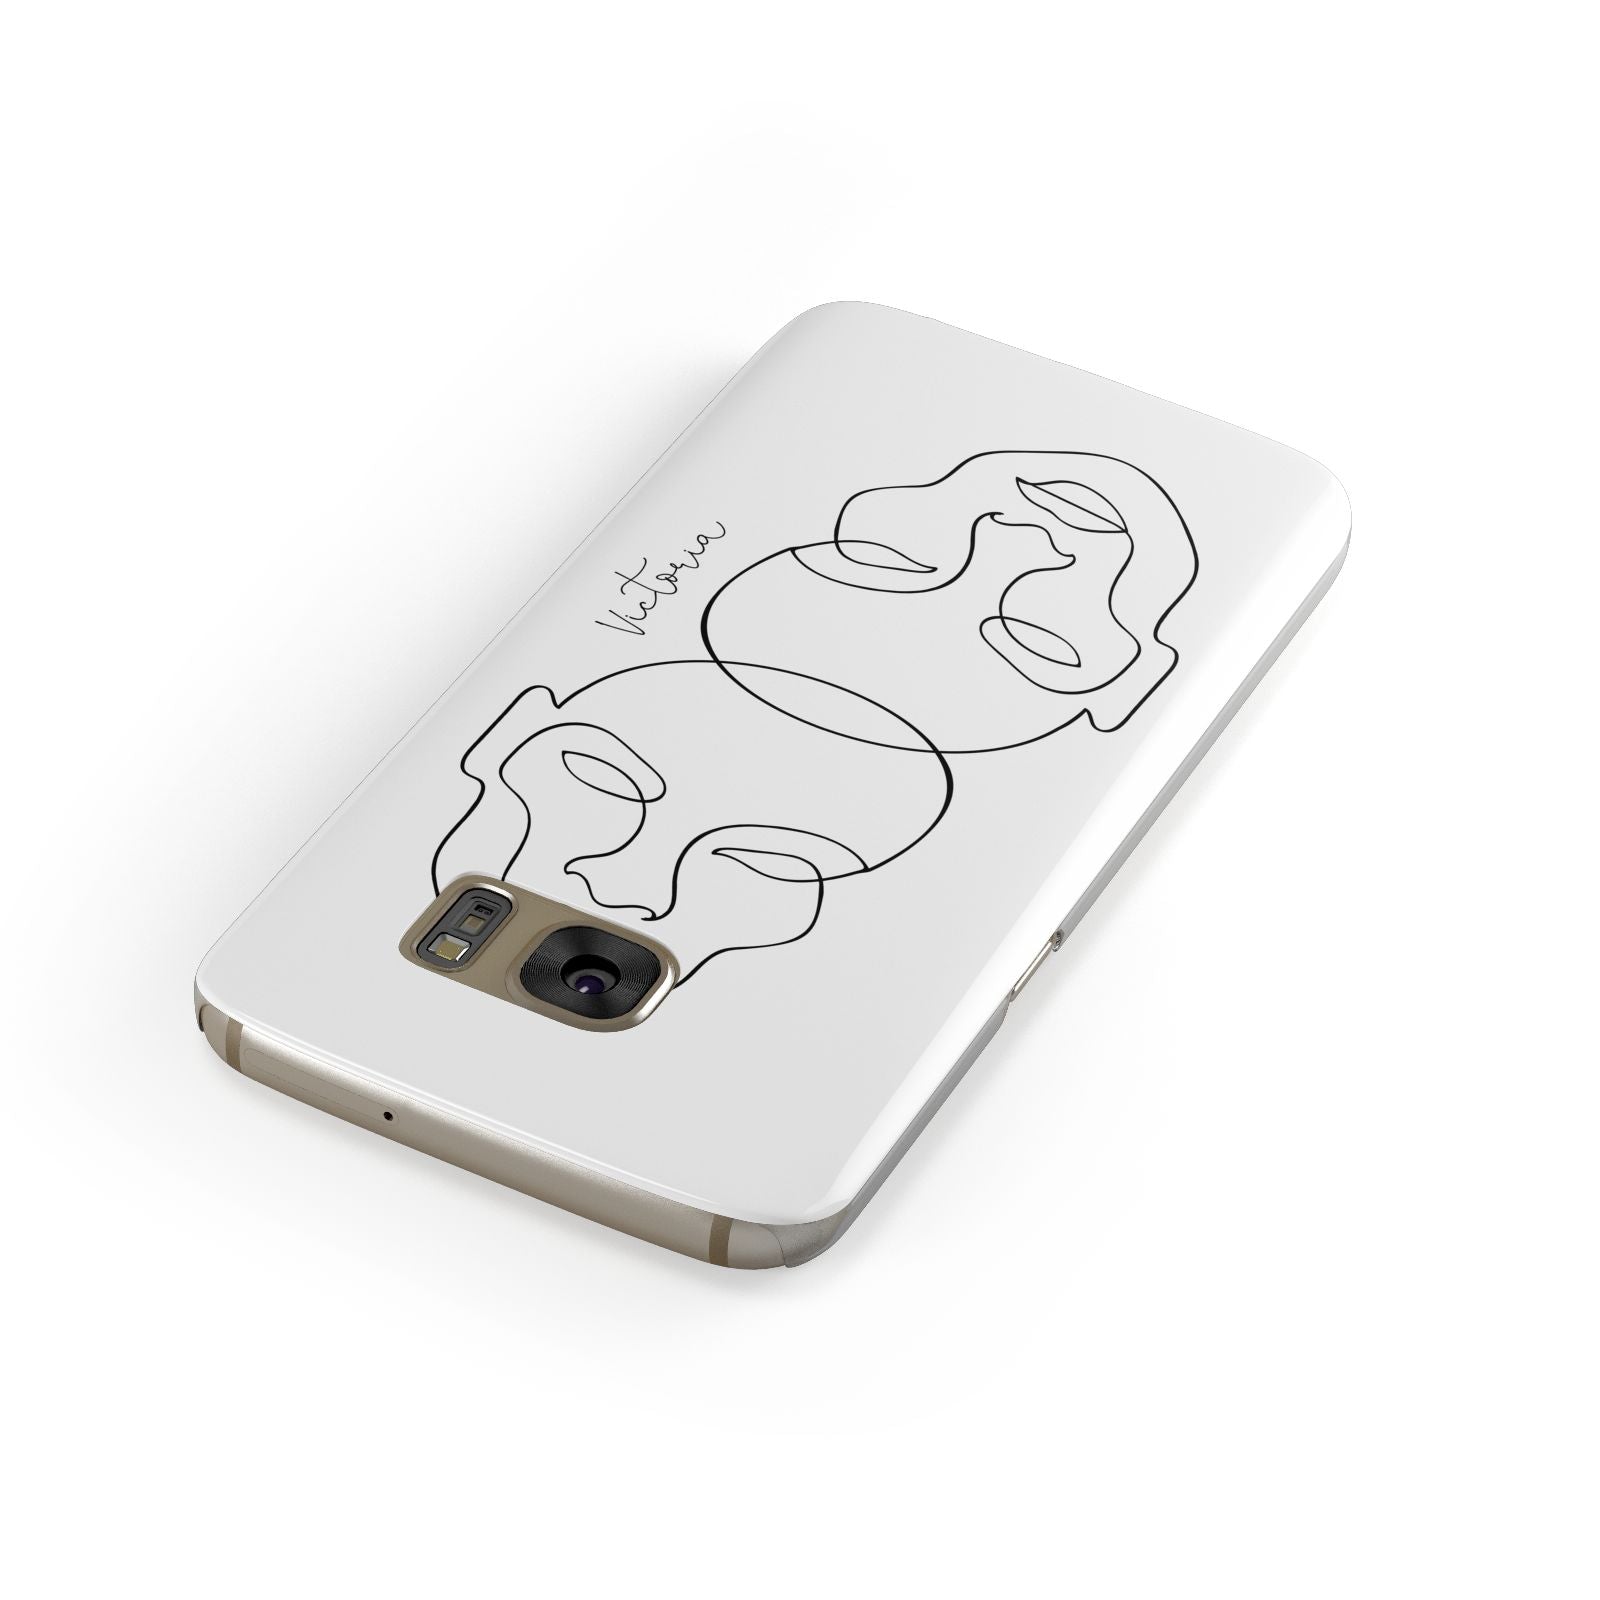 Personalised White Line Art Samsung Galaxy Case Front Close Up